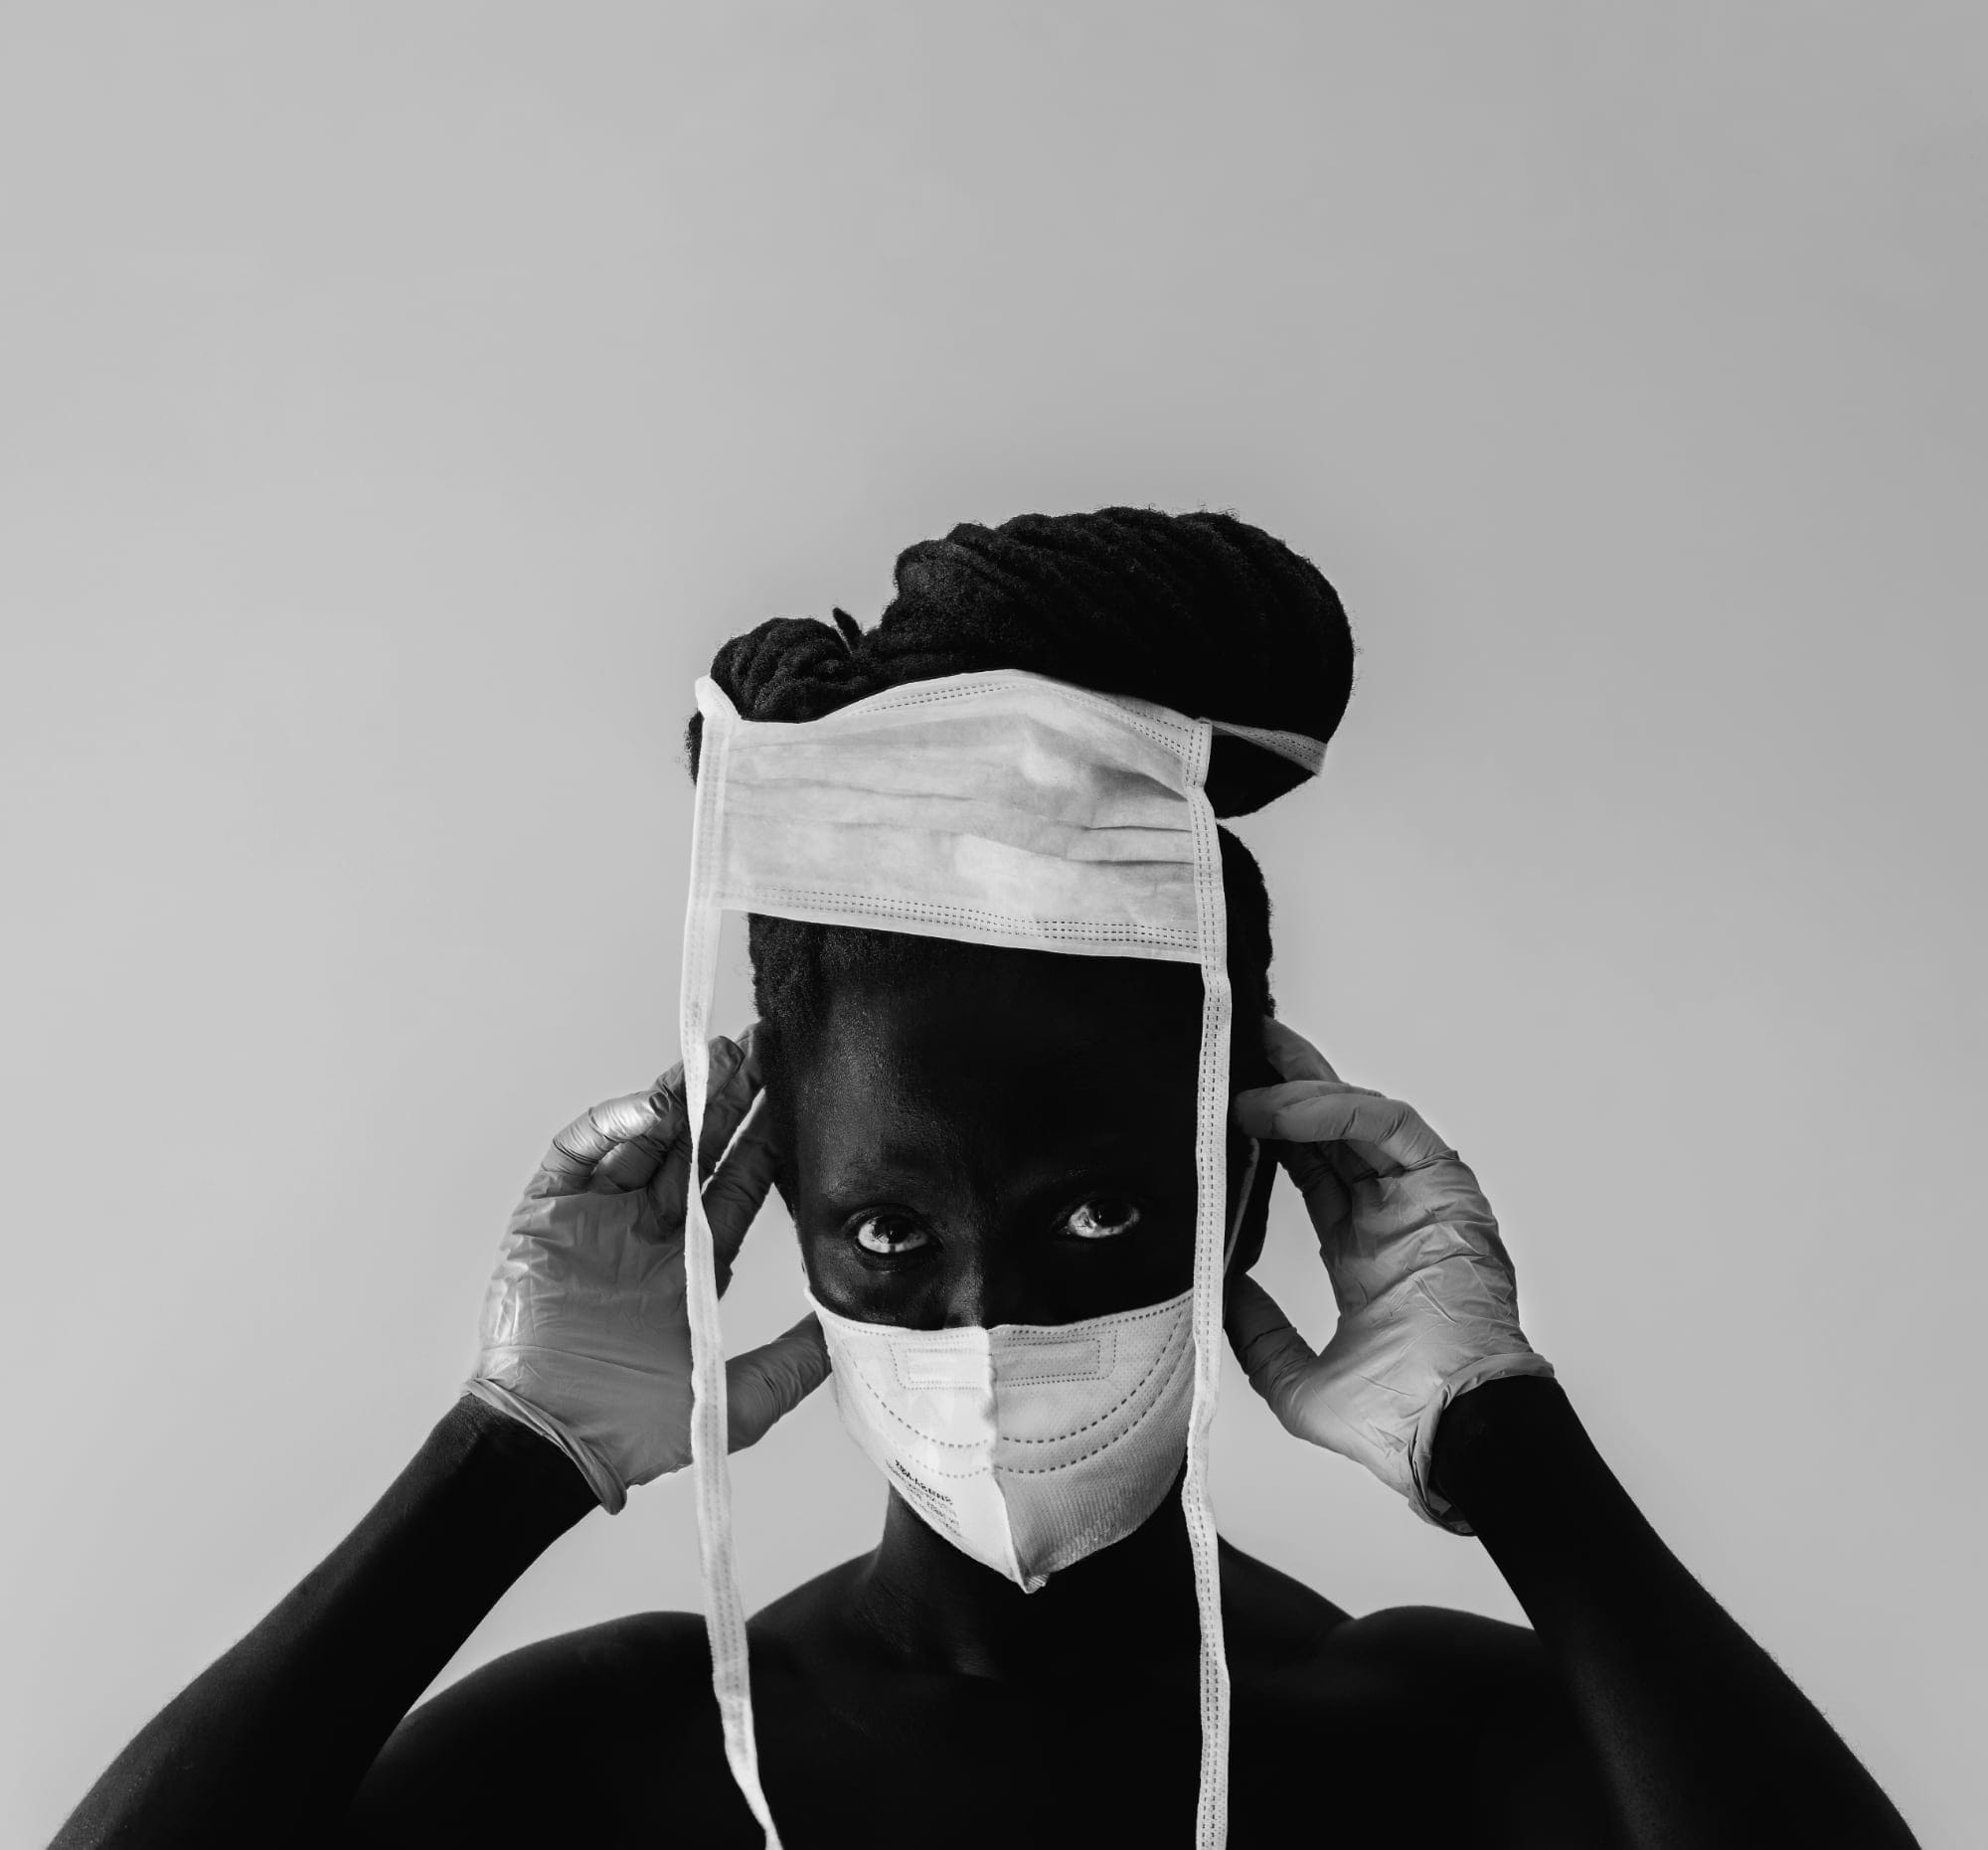 a black and white portrait of the artist wearing two white masks on their face and head and gloves